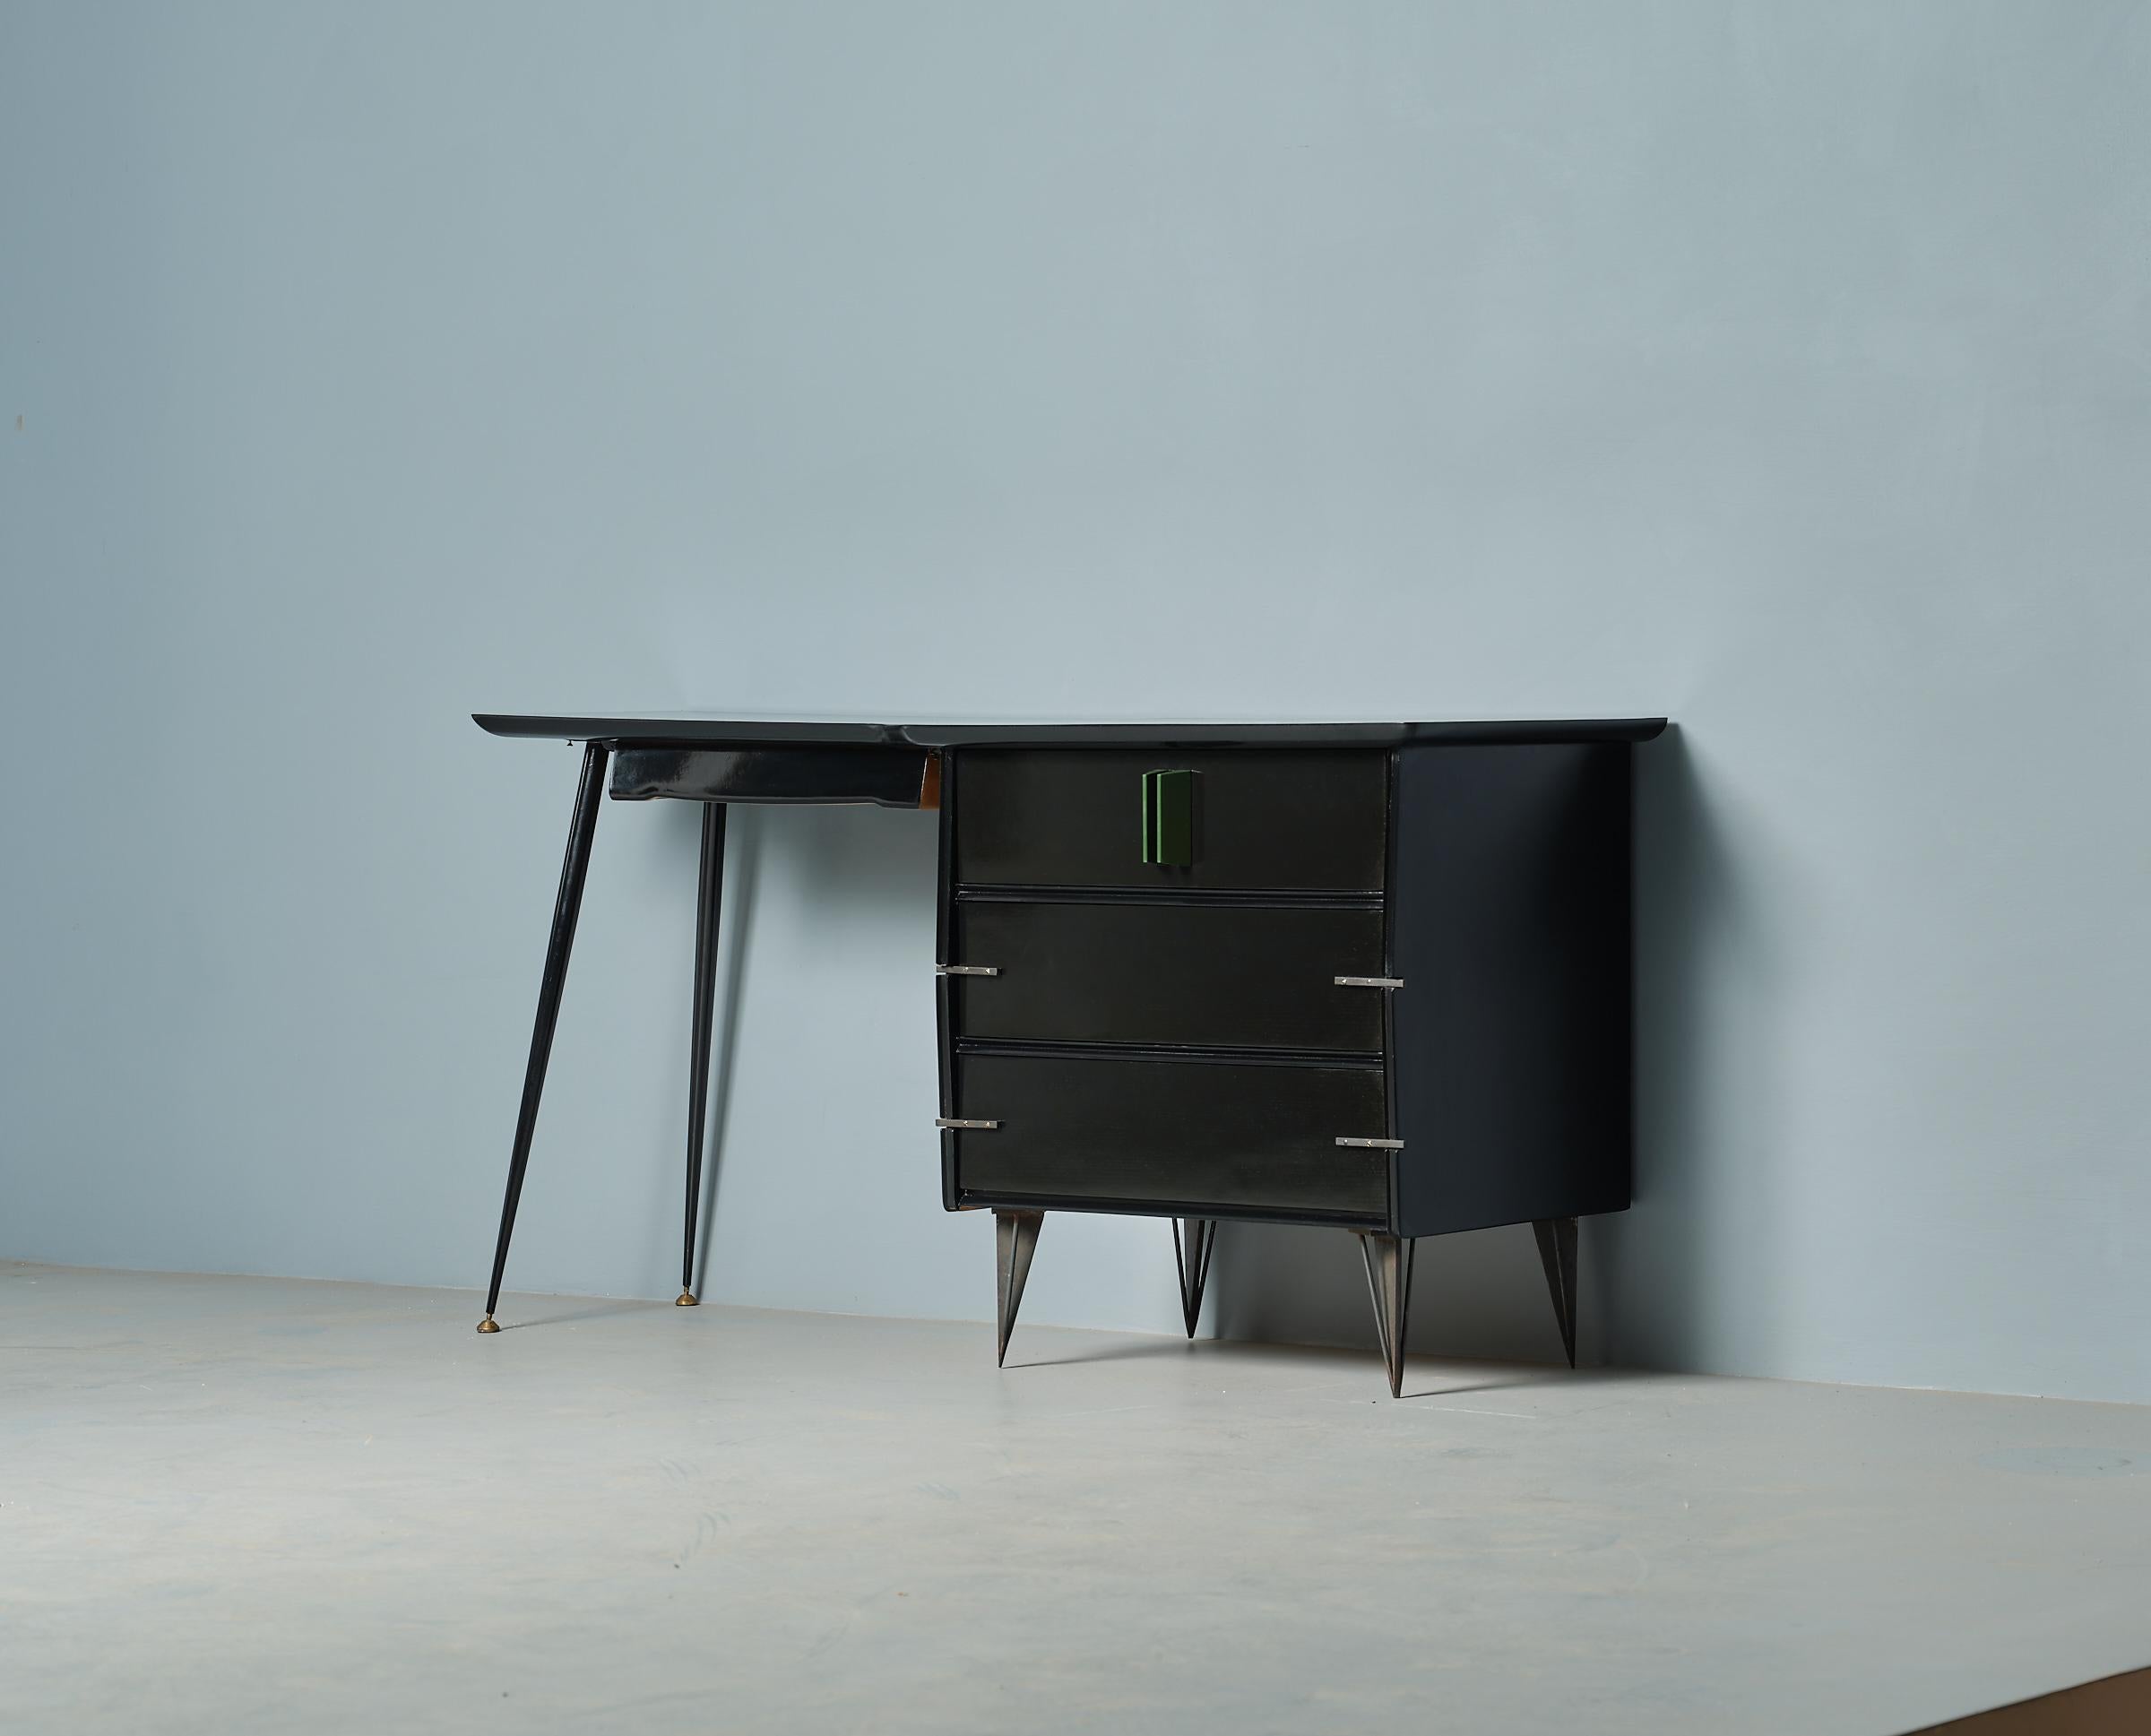 Presenting a masterpiece of timeless elegance: the meticulously restored and restyled vintage desk from the 1950s, crafted with meticulous care by RETRO4M. This exceptional piece seamlessly combines the charm of mid-century design with contemporary